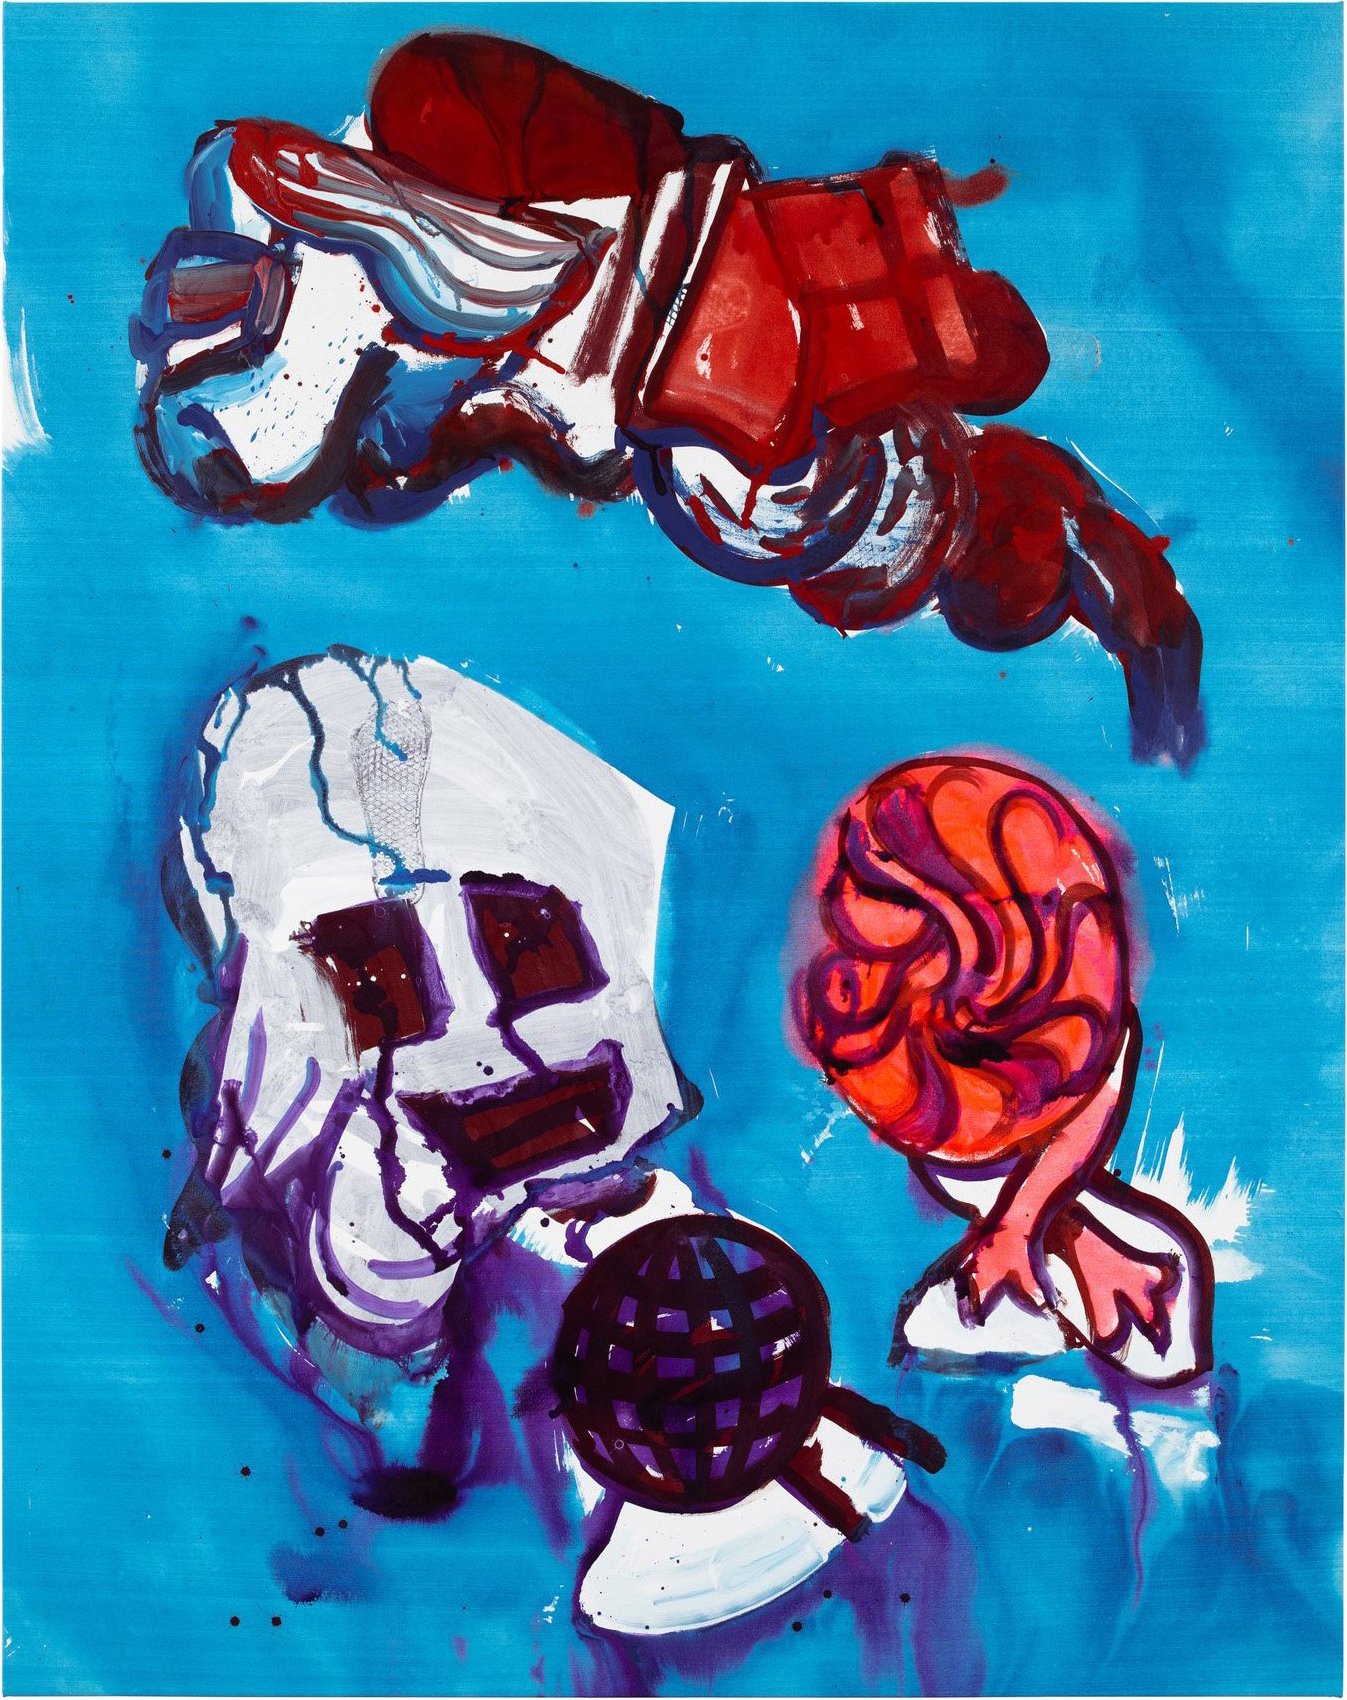  Drew Beattie  Floaters   2021 acrylic on canvas  96 x 76 inches   